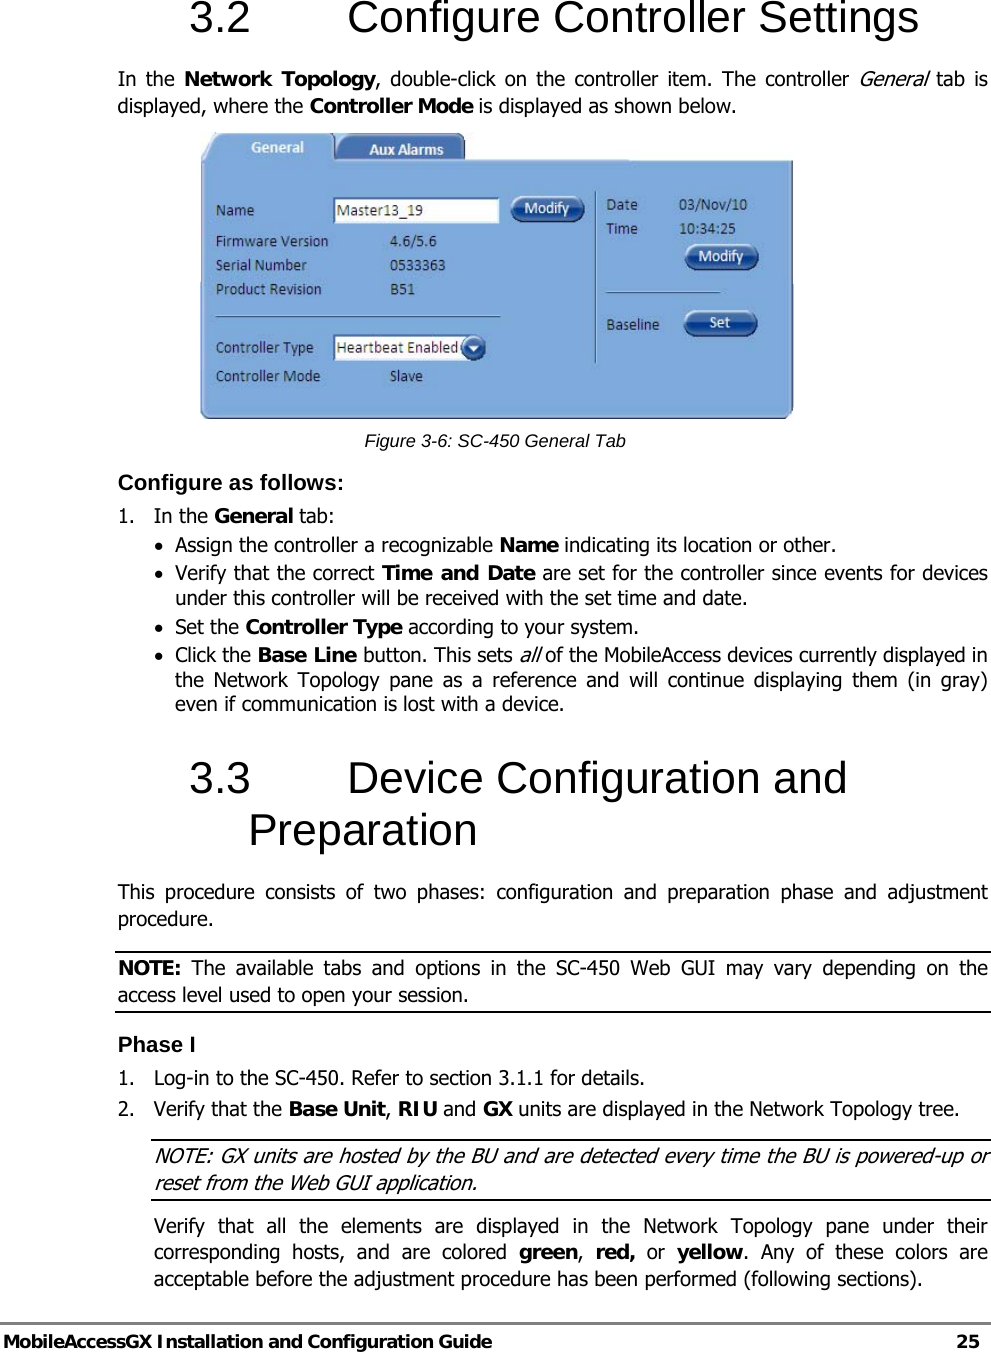   MobileAccessGX Installation and Configuration Guide   25  3.2 Configure Controller Settings In the Network Topology, double-click on the controller item. The controller General tab is displayed, where the Controller Mode is displayed as shown below.  Figure 3-6: SC-450 General Tab Configure as follows: 1. In the General tab: • Assign the controller a recognizable Name indicating its location or other.  • Verify that the correct Time and Date are set for the controller since events for devices under this controller will be received with the set time and date. • Set the Controller Type according to your system. • Click the Base Line button. This sets all of the MobileAccess devices currently displayed in the Network Topology pane as a reference and will continue displaying them (in gray) even if communication is lost with a device. 3.3  Device Configuration and Preparation This procedure consists of two phases: configuration and preparation phase and adjustment procedure. NOTE: The available tabs and options in the SC-450 Web GUI may vary depending on the access level used to open your session. Phase I 1.  Log-in to the SC-450. Refer to section 3.1.1 for details. 2. Verify that the Base Unit, RIU and GX units are displayed in the Network Topology tree. NOTE: GX units are hosted by the BU and are detected every time the BU is powered-up or reset from the Web GUI application. Verify that all the elements are displayed in the Network Topology pane under their corresponding hosts, and are colored green,  red, or yellow. Any of these colors are acceptable before the adjustment procedure has been performed (following sections). 